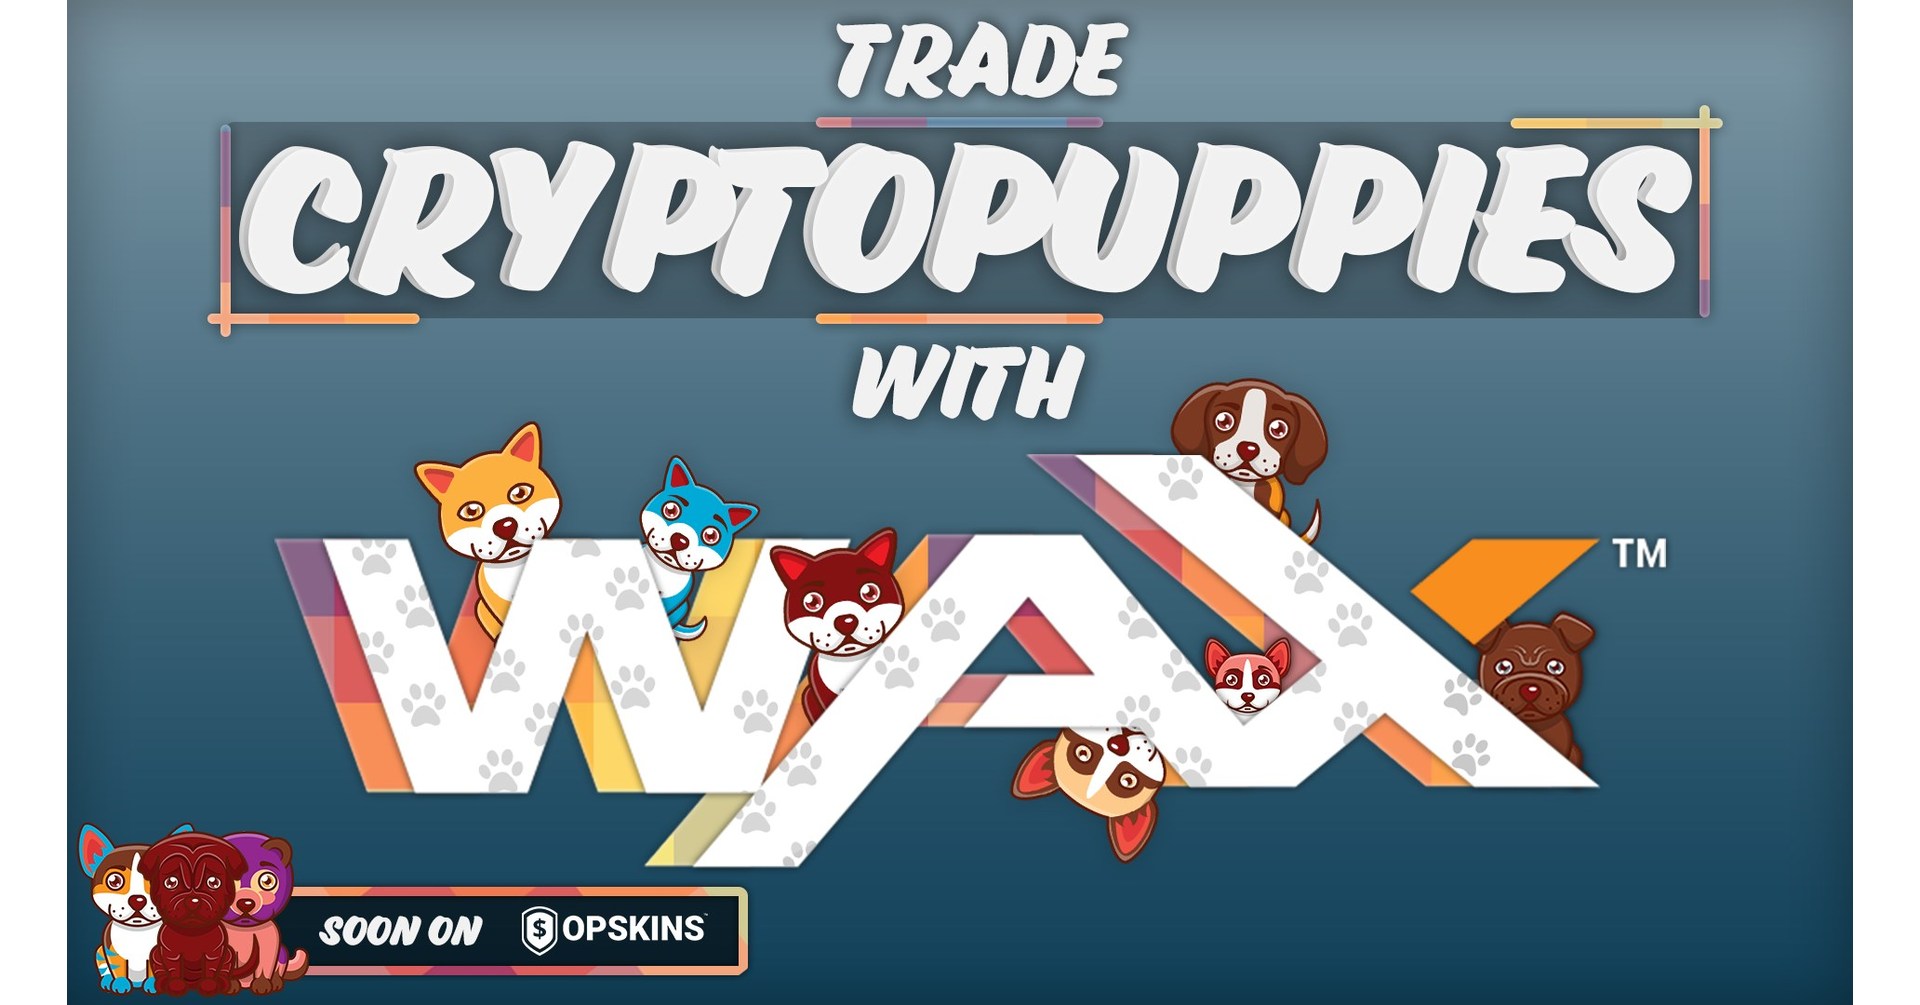 opskins sell crypto collectibles